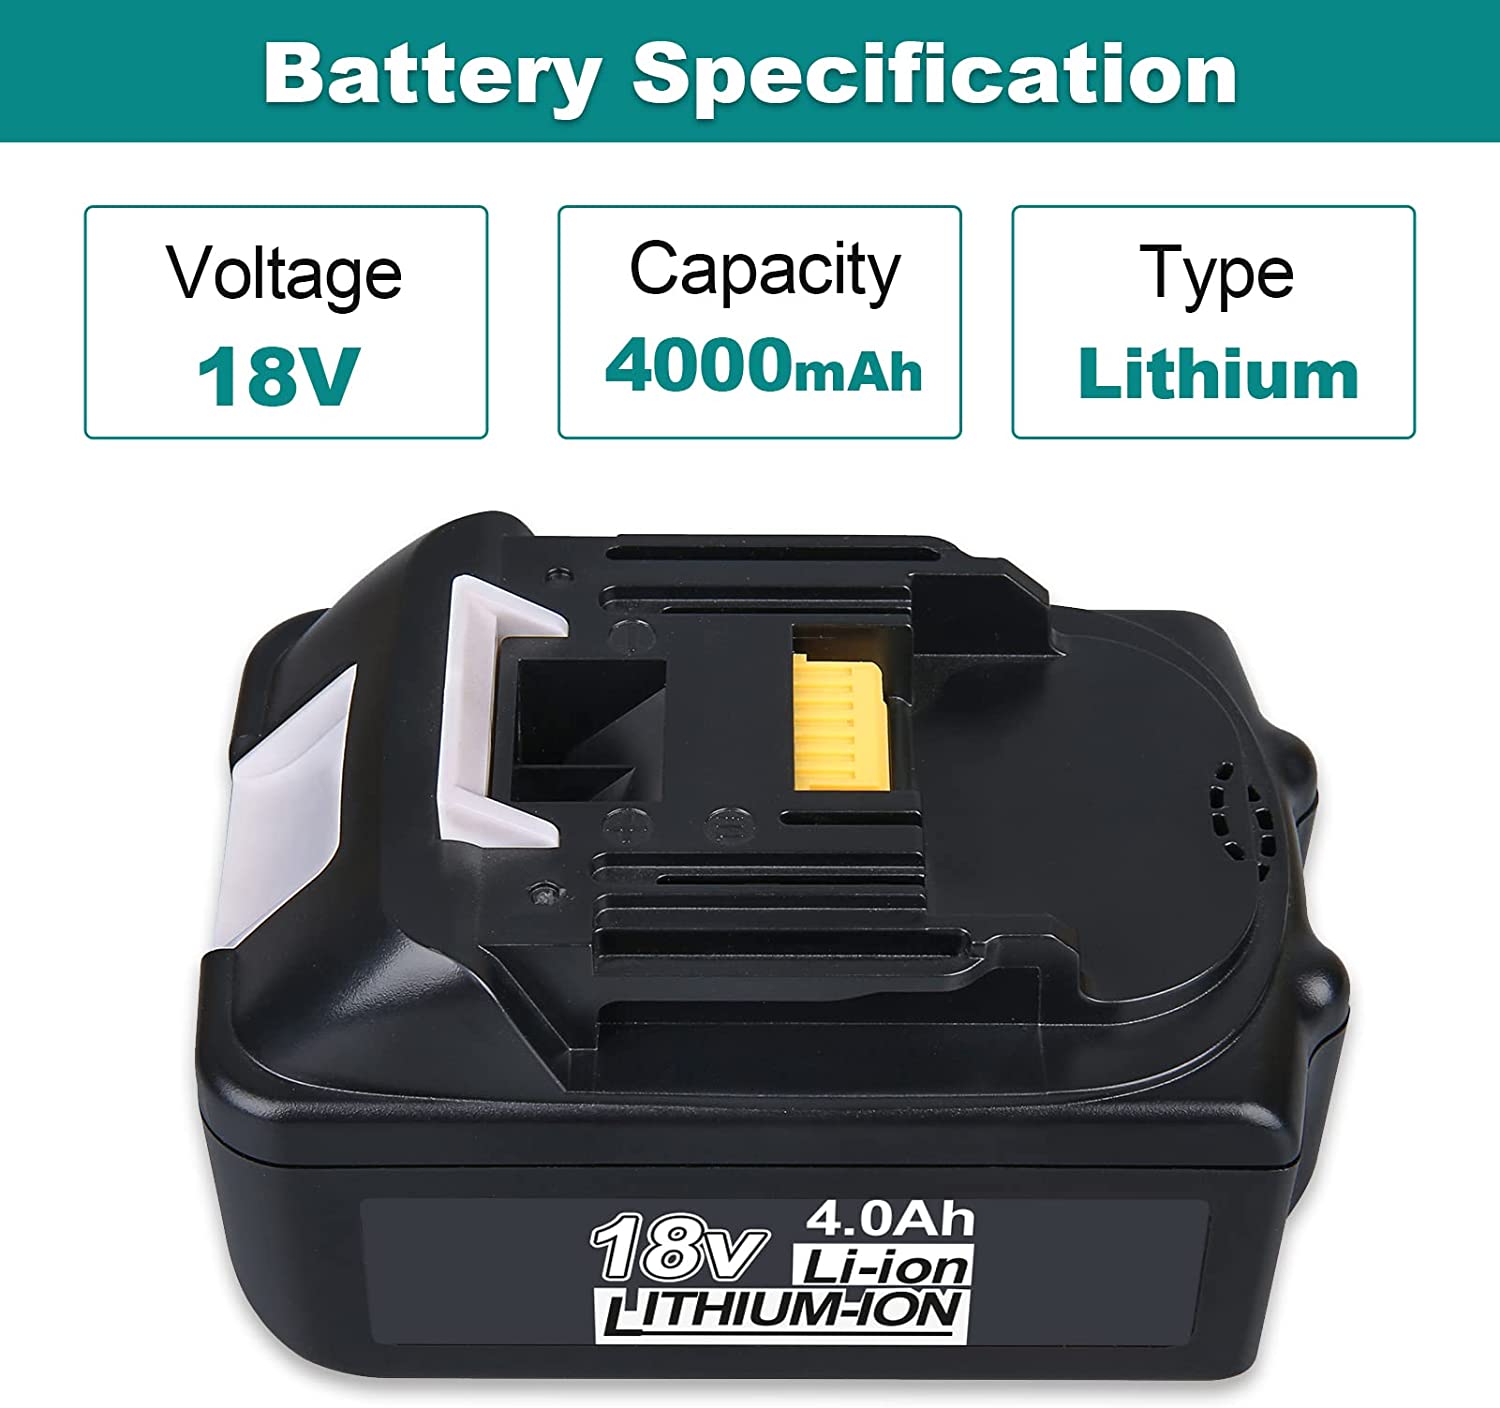 For Makita 18V Battery Replacement | BL1840B 4.0Ah Lithium BL1830 BL1840 BL1845 Battery 2 Pack | clearance